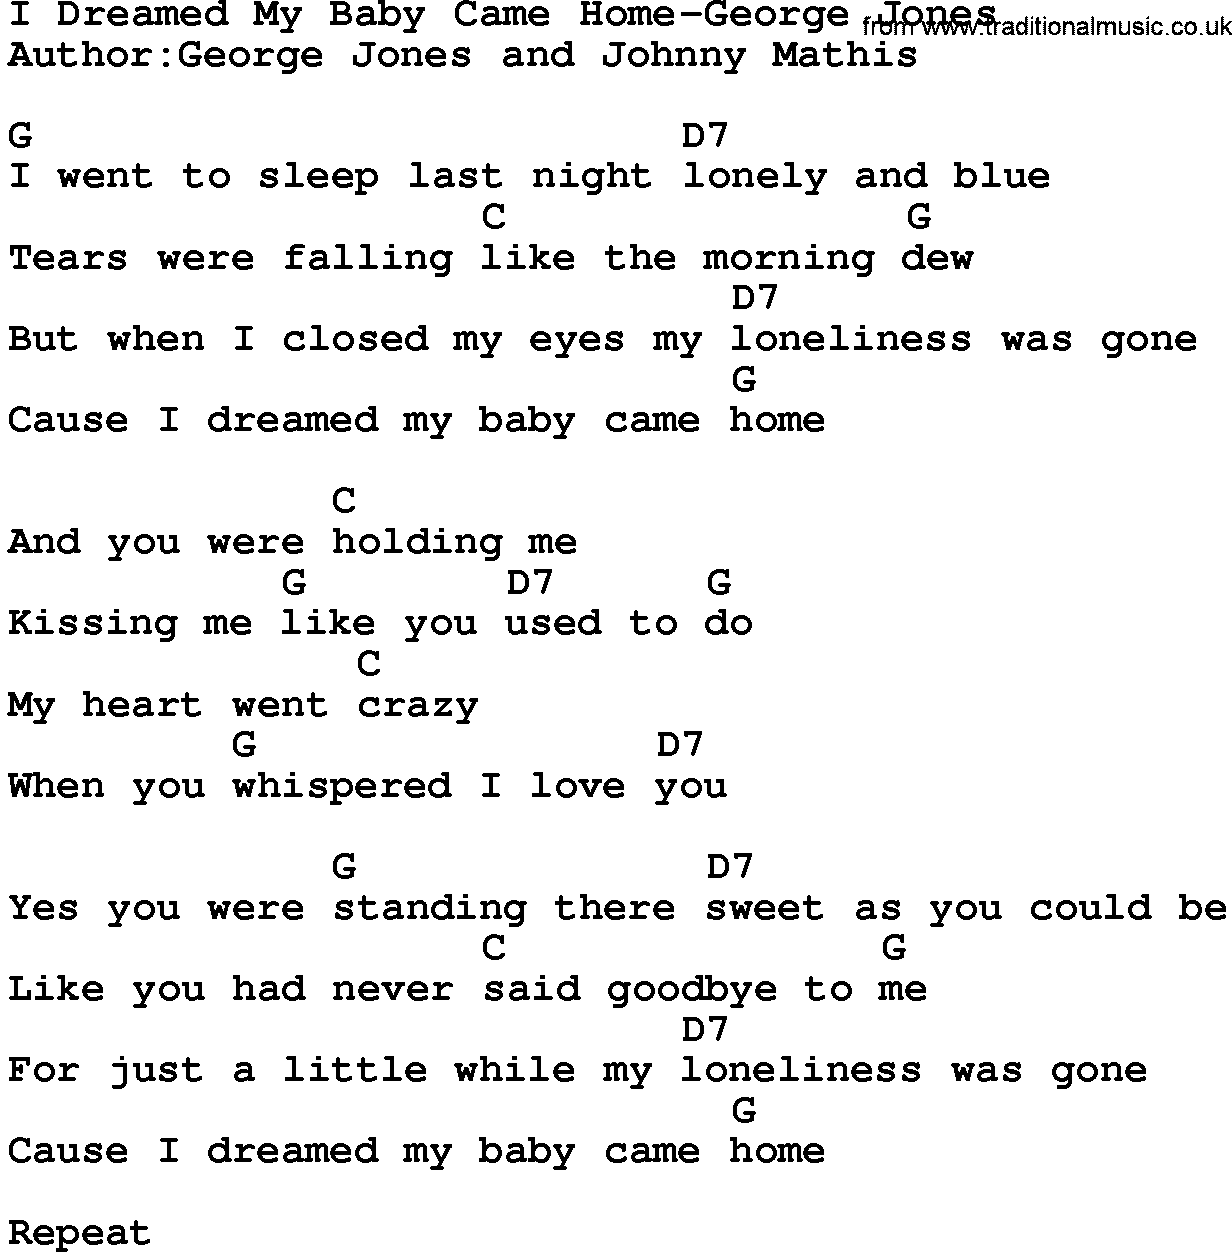 Country Music:I Dreamed My Baby Came Home-George Jones Lyrics and Chords.